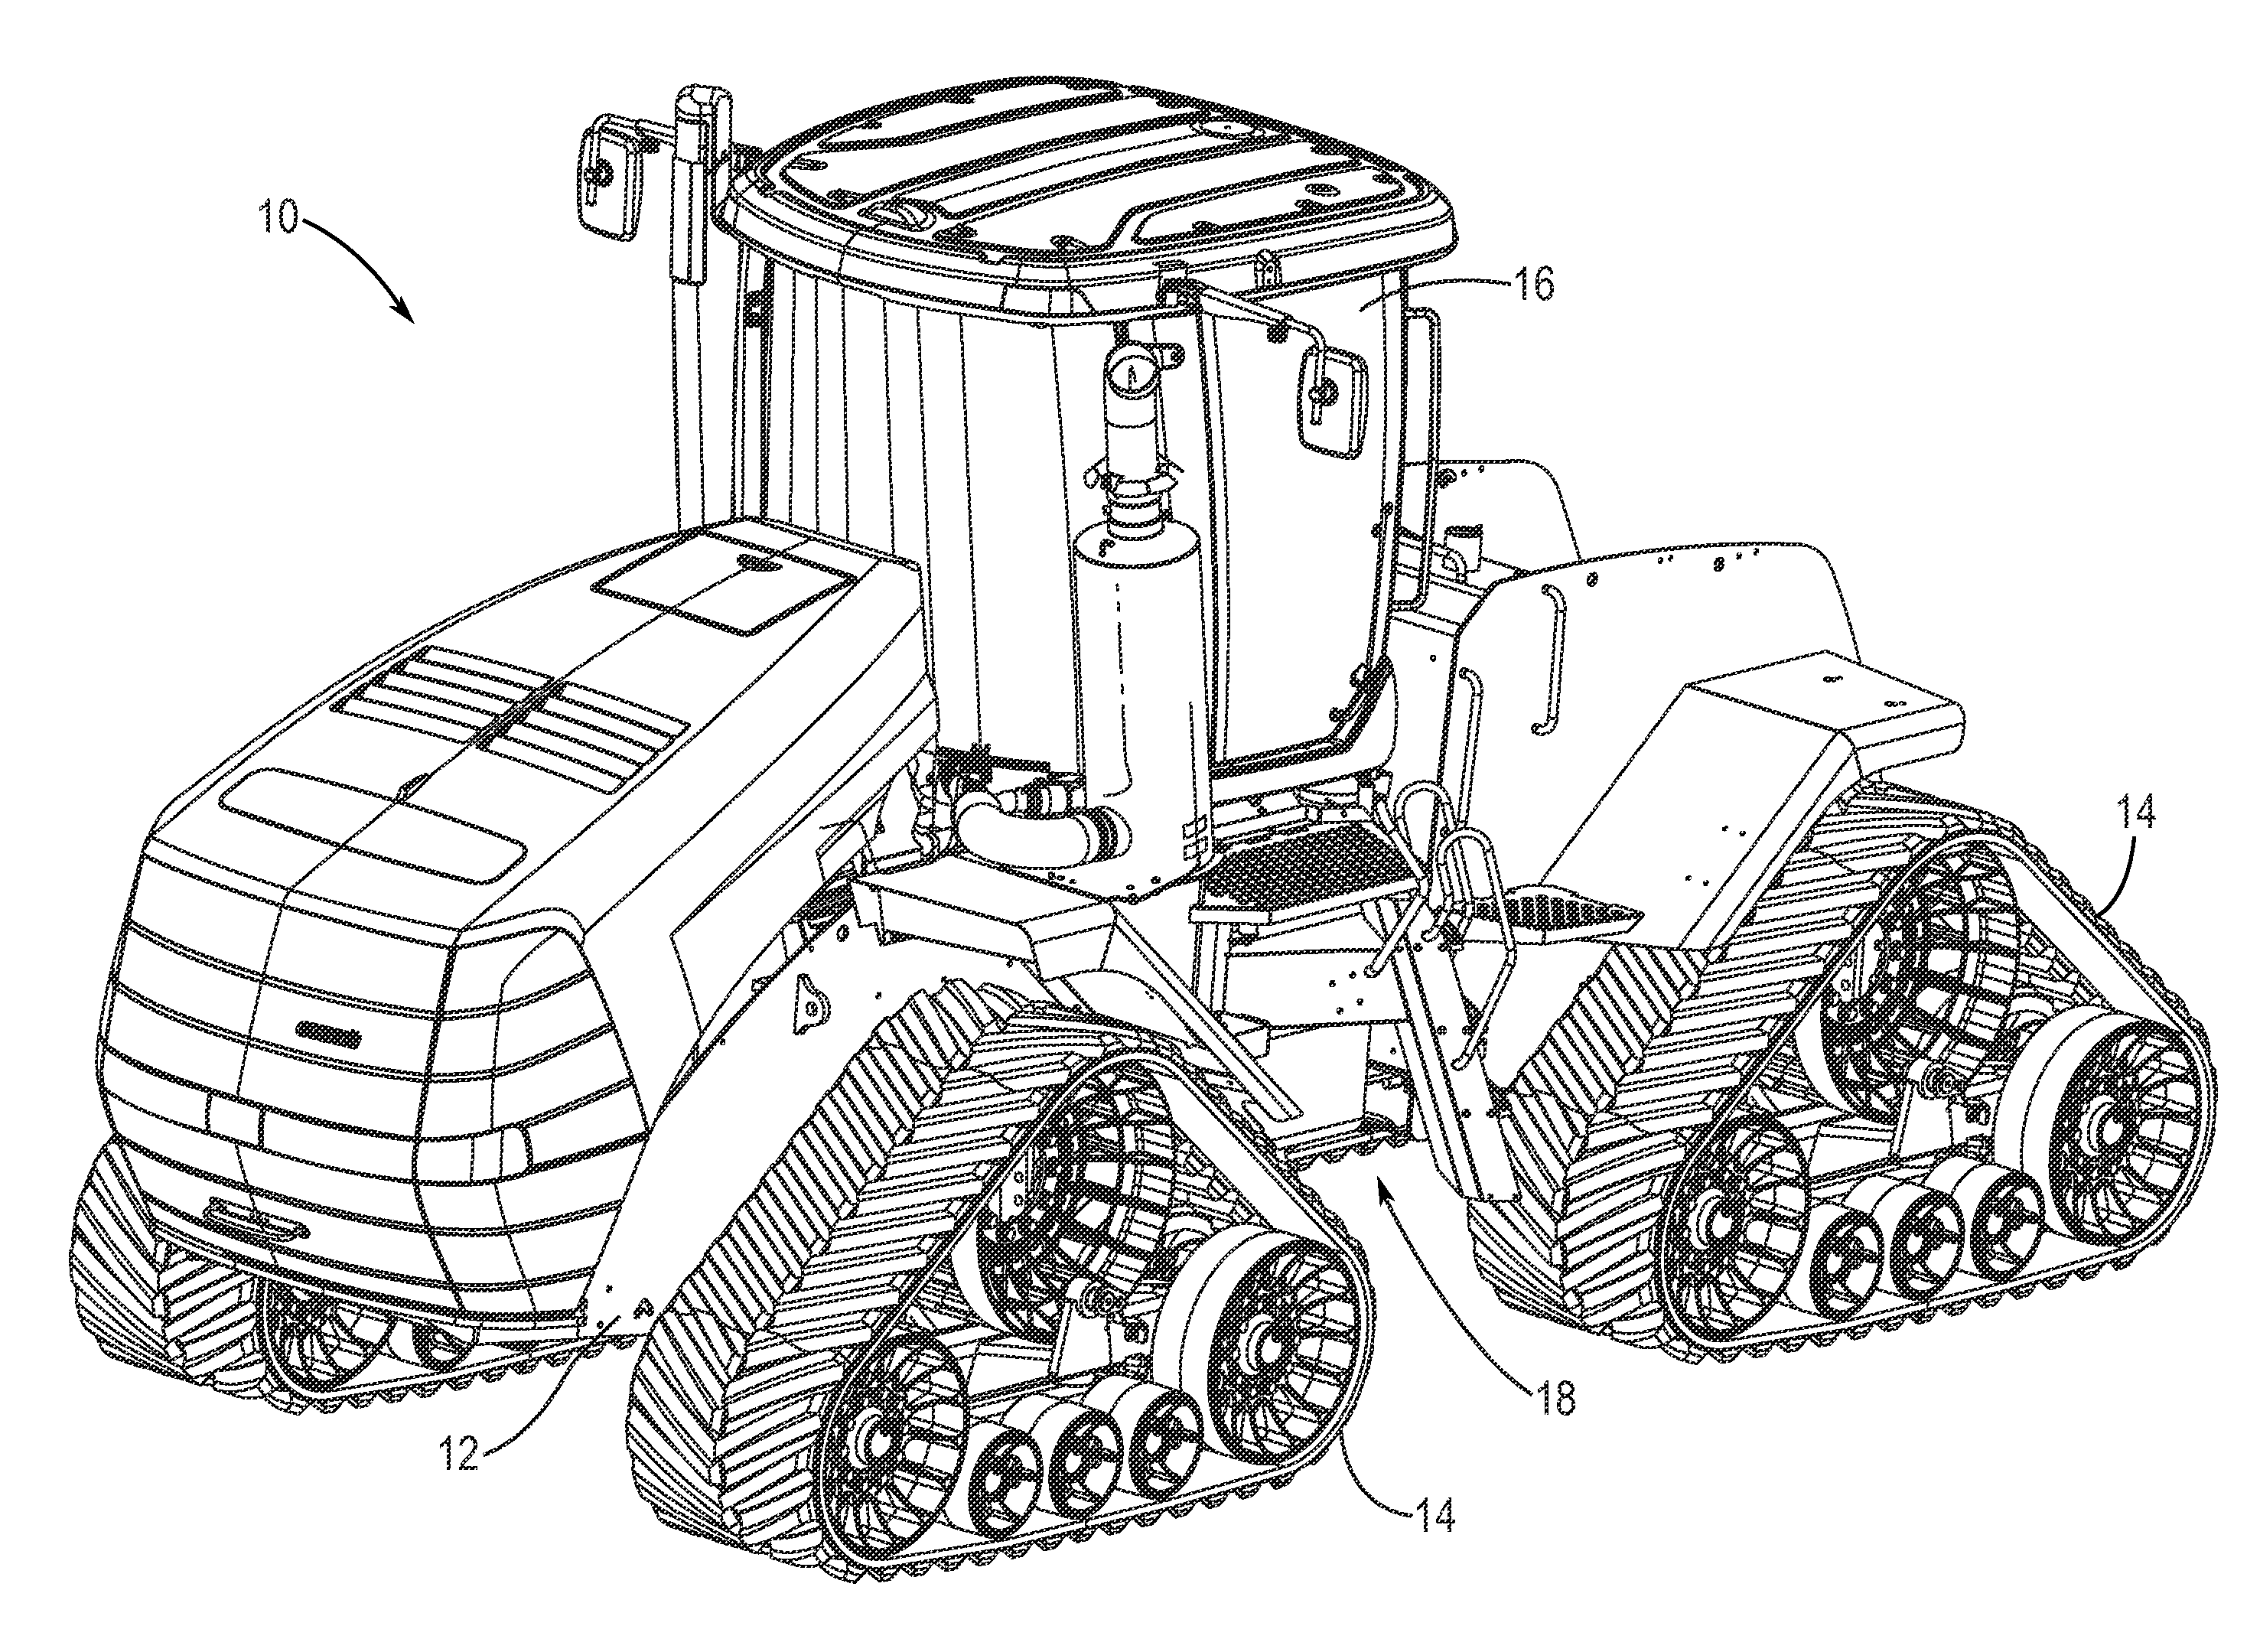 Cab suspension system for an off-road vehicle